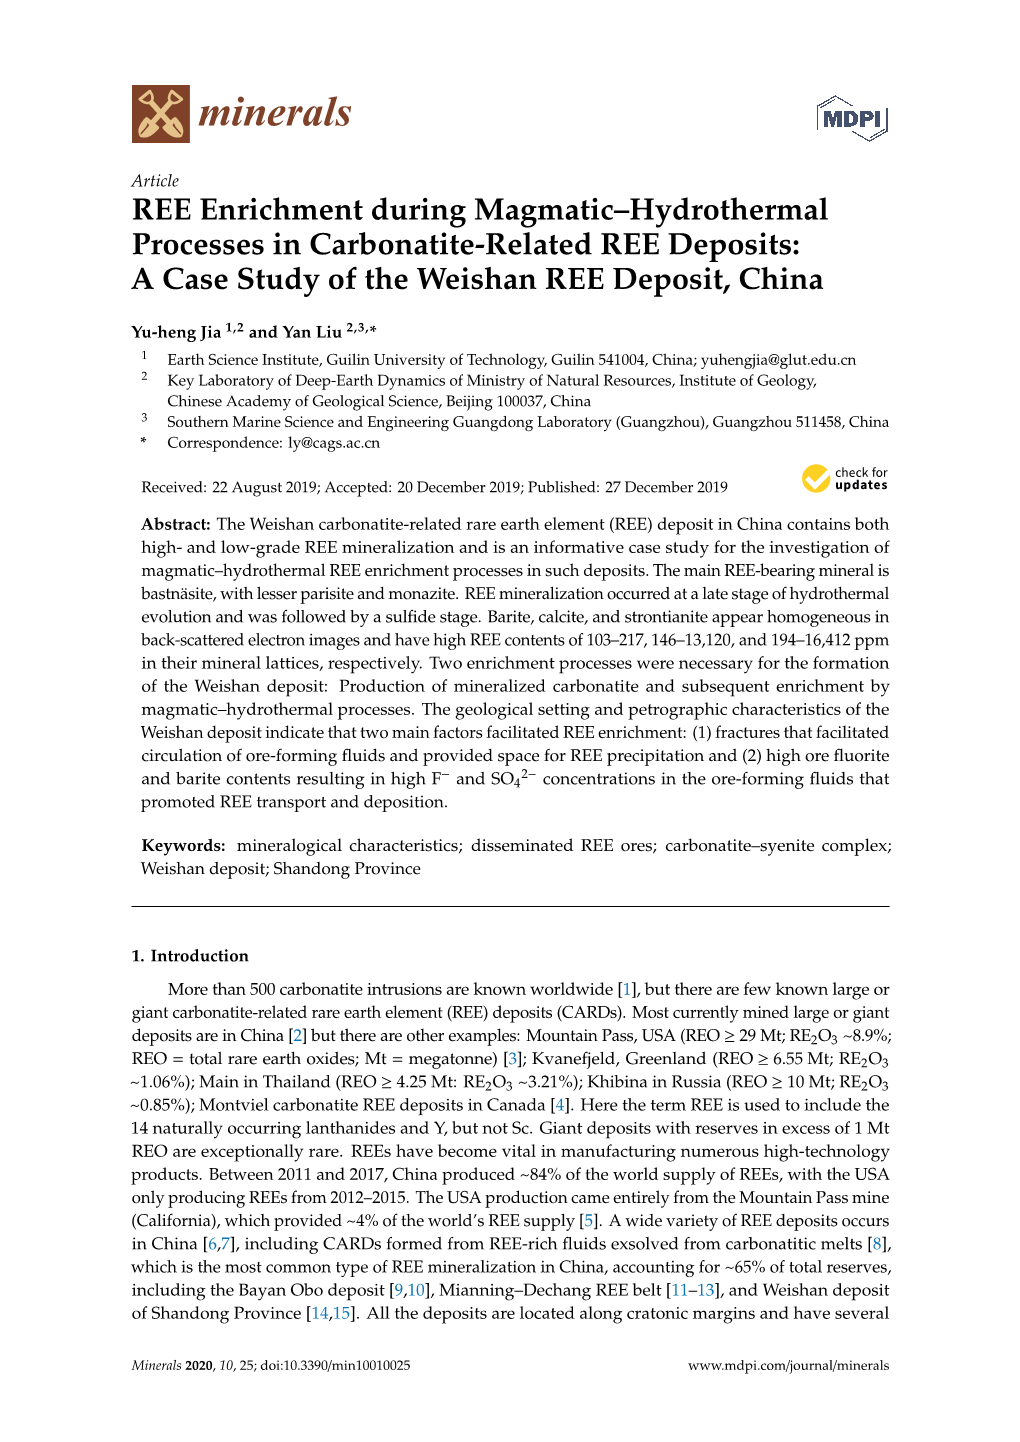 A Case Study of the Weishan REE Deposit, China